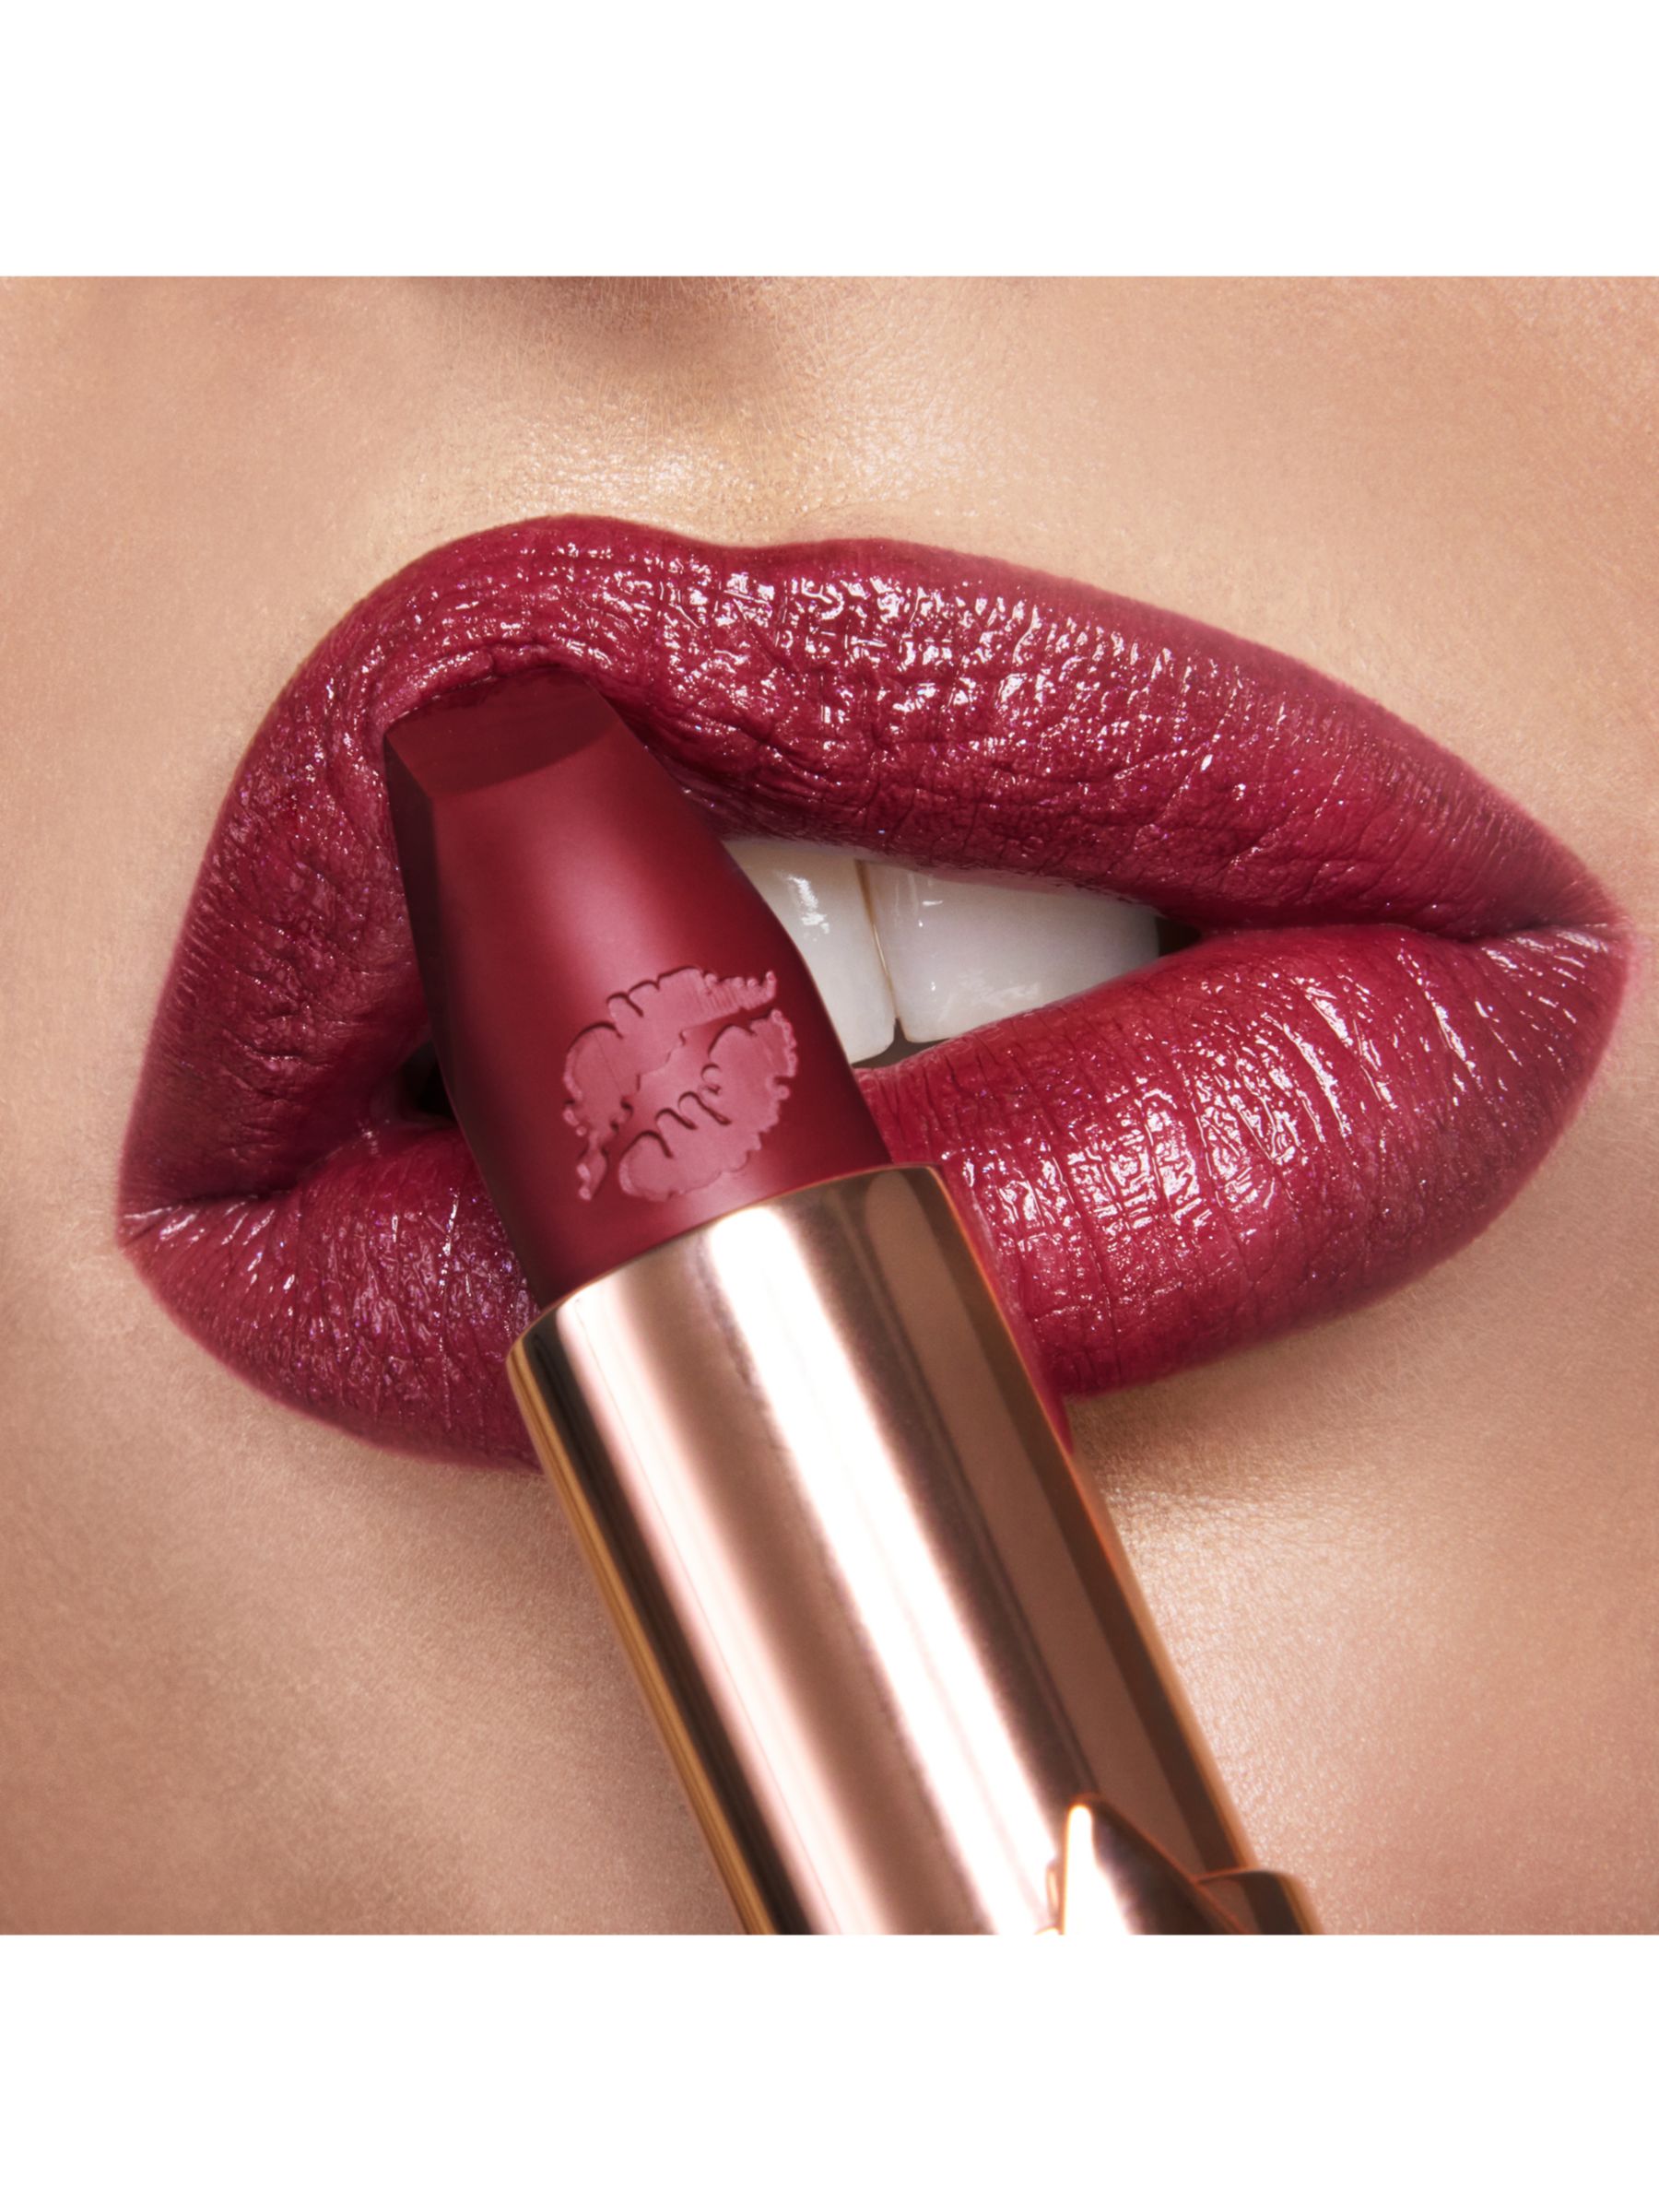 Charlotte Tilbury Limited Edition Rock Lips Lipstick, Ready For Lust 5